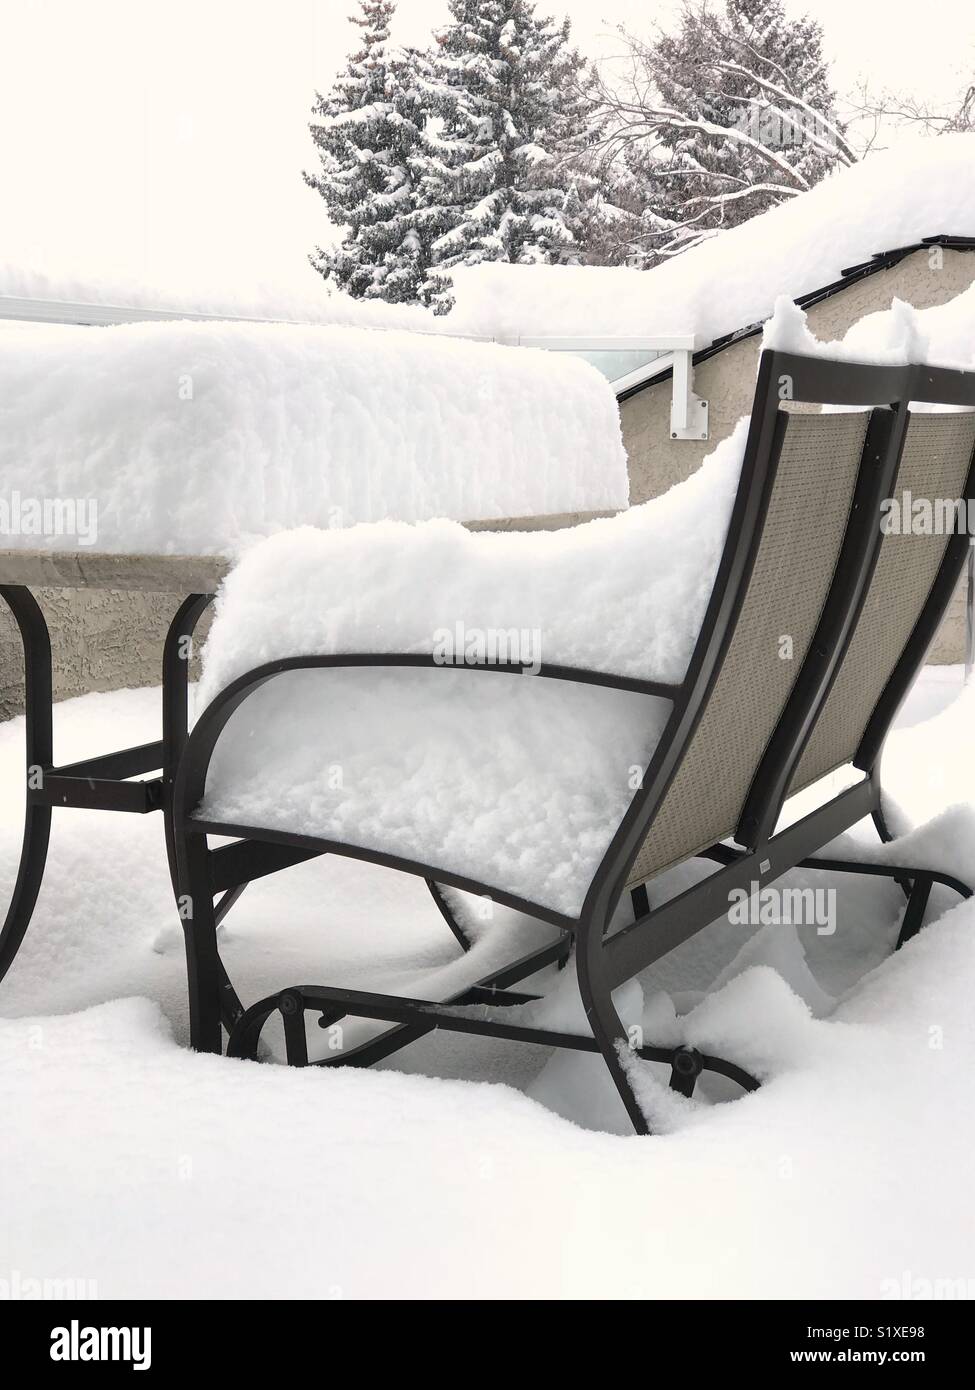 A large overnight snowfall covers patio furniture. Stock Photo